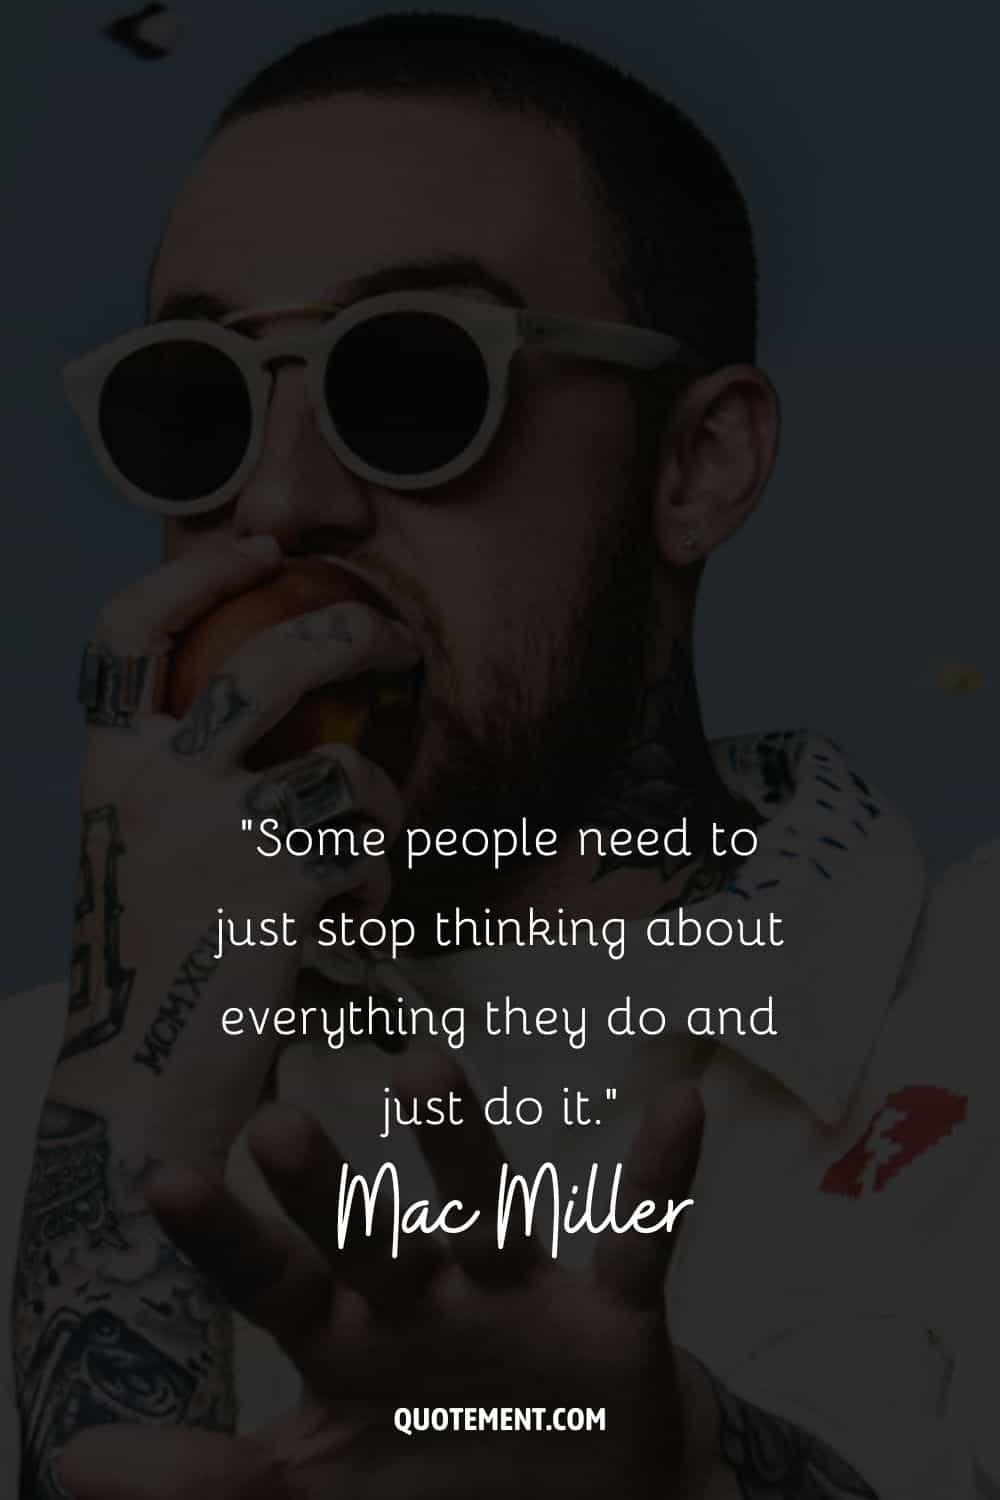 “Some people need to just stop thinking about everything they do and just do it.” – Mac Miller